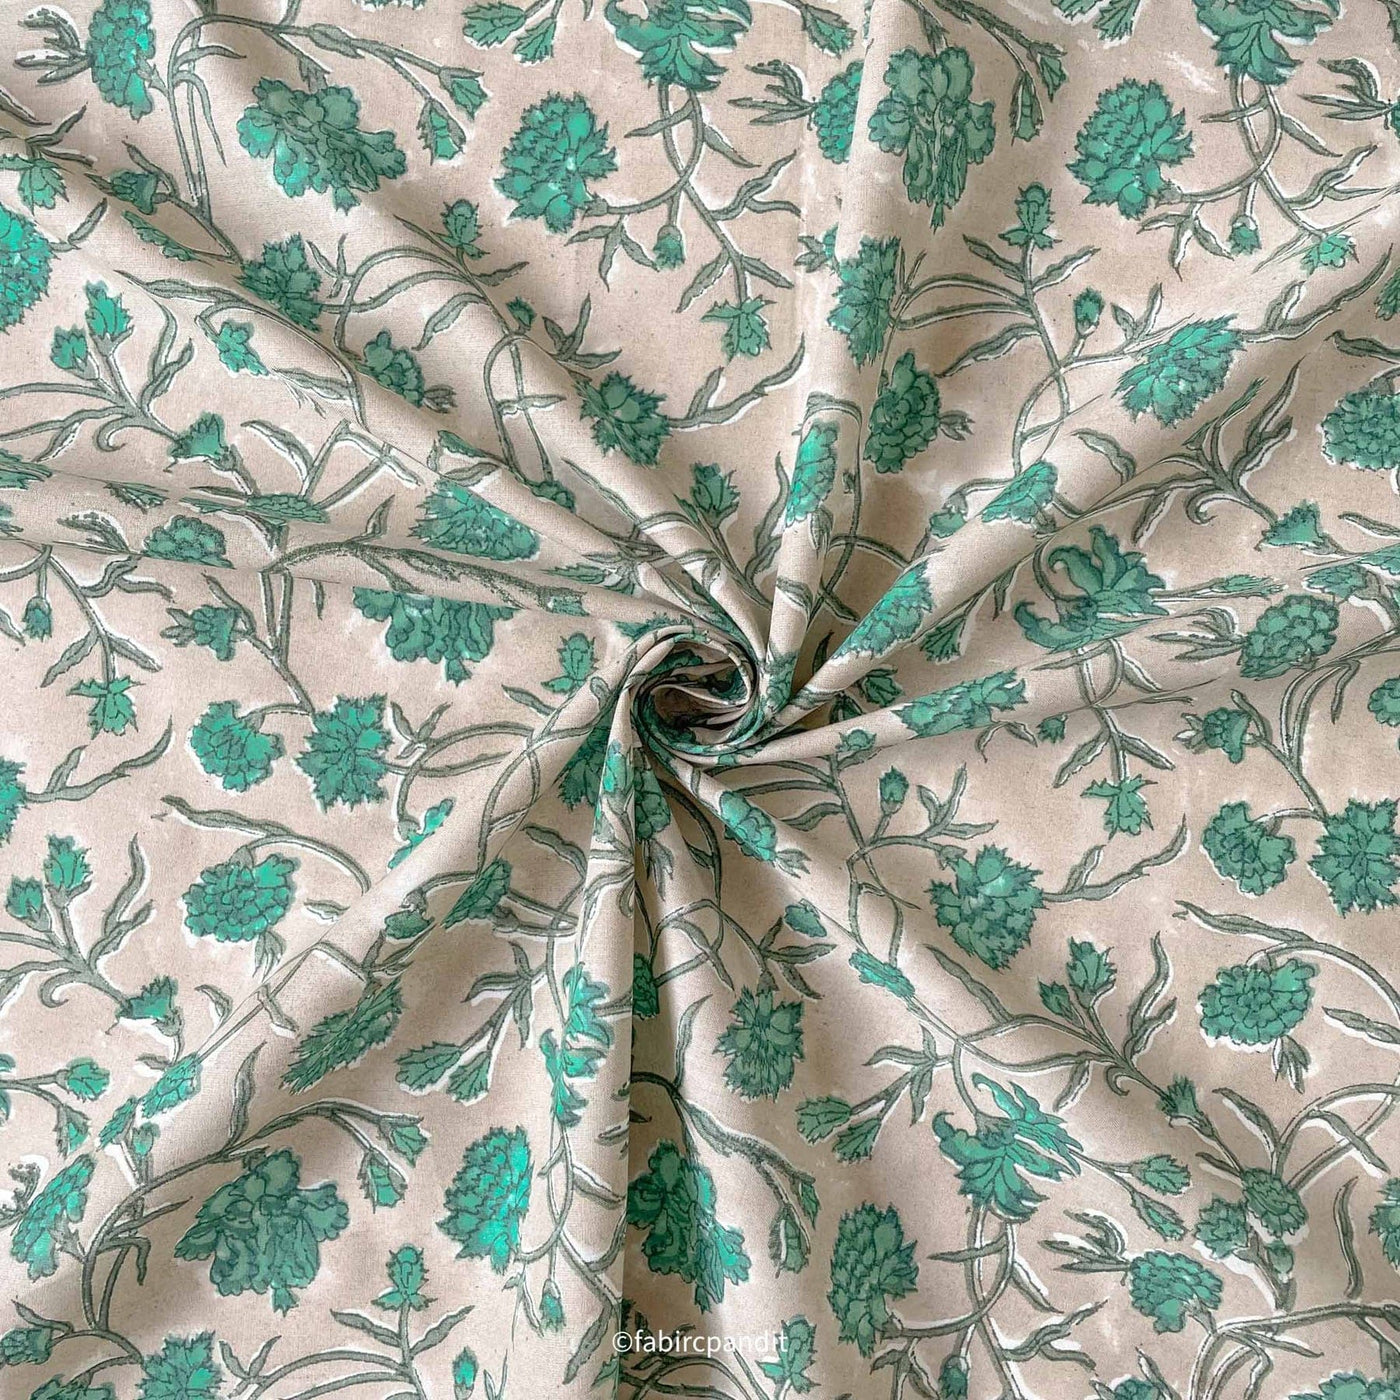 Fabric Pandit Fabric Grey and Turquoise Egyptian Floral Vines Hand Block Printed Pure Cotton Fabric (Width 43 inches)